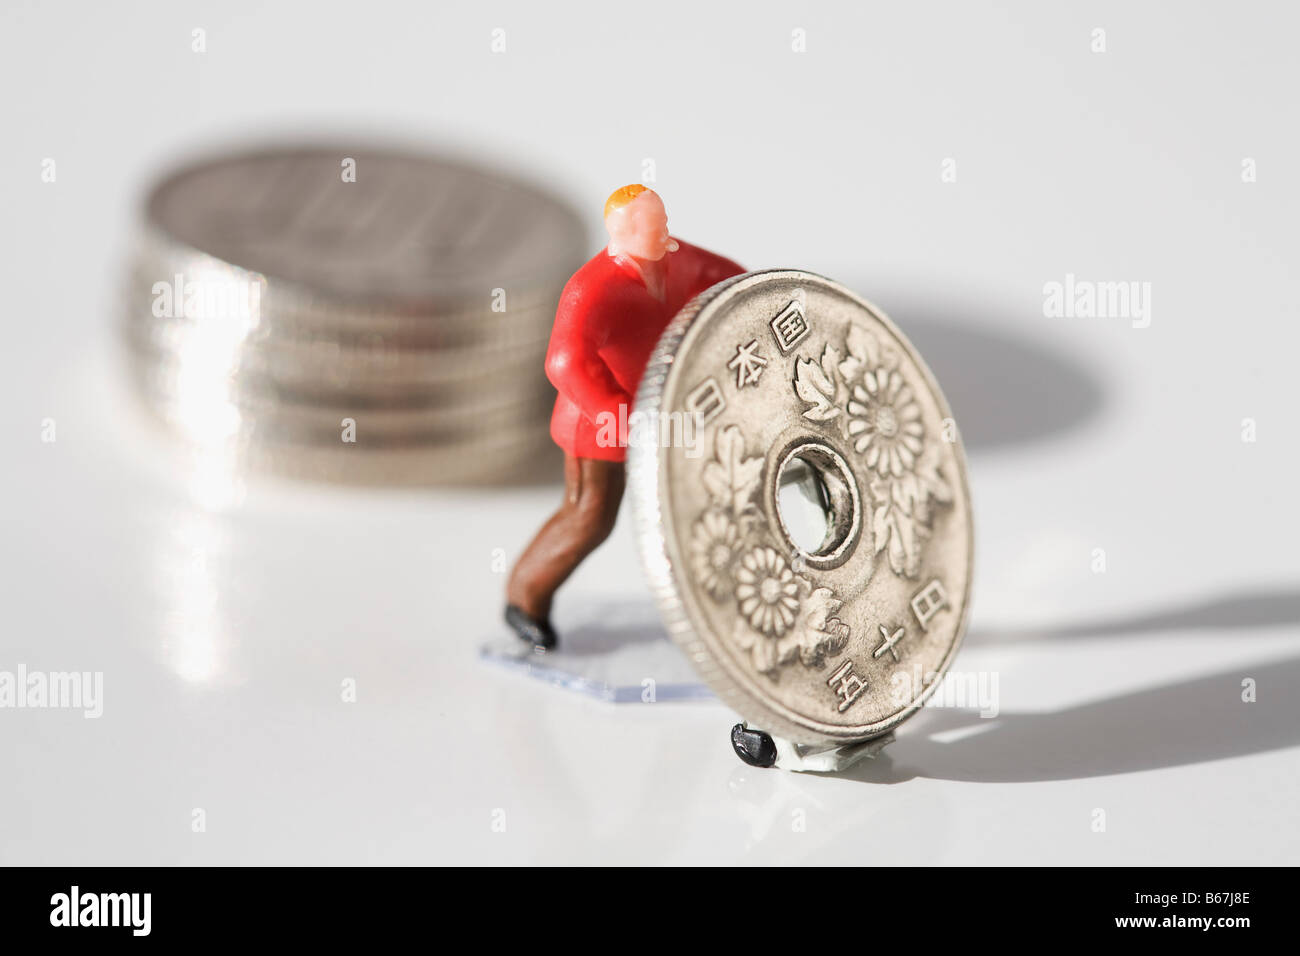 Figurine of a manual worker pushing a Chinese coin Stock Photo